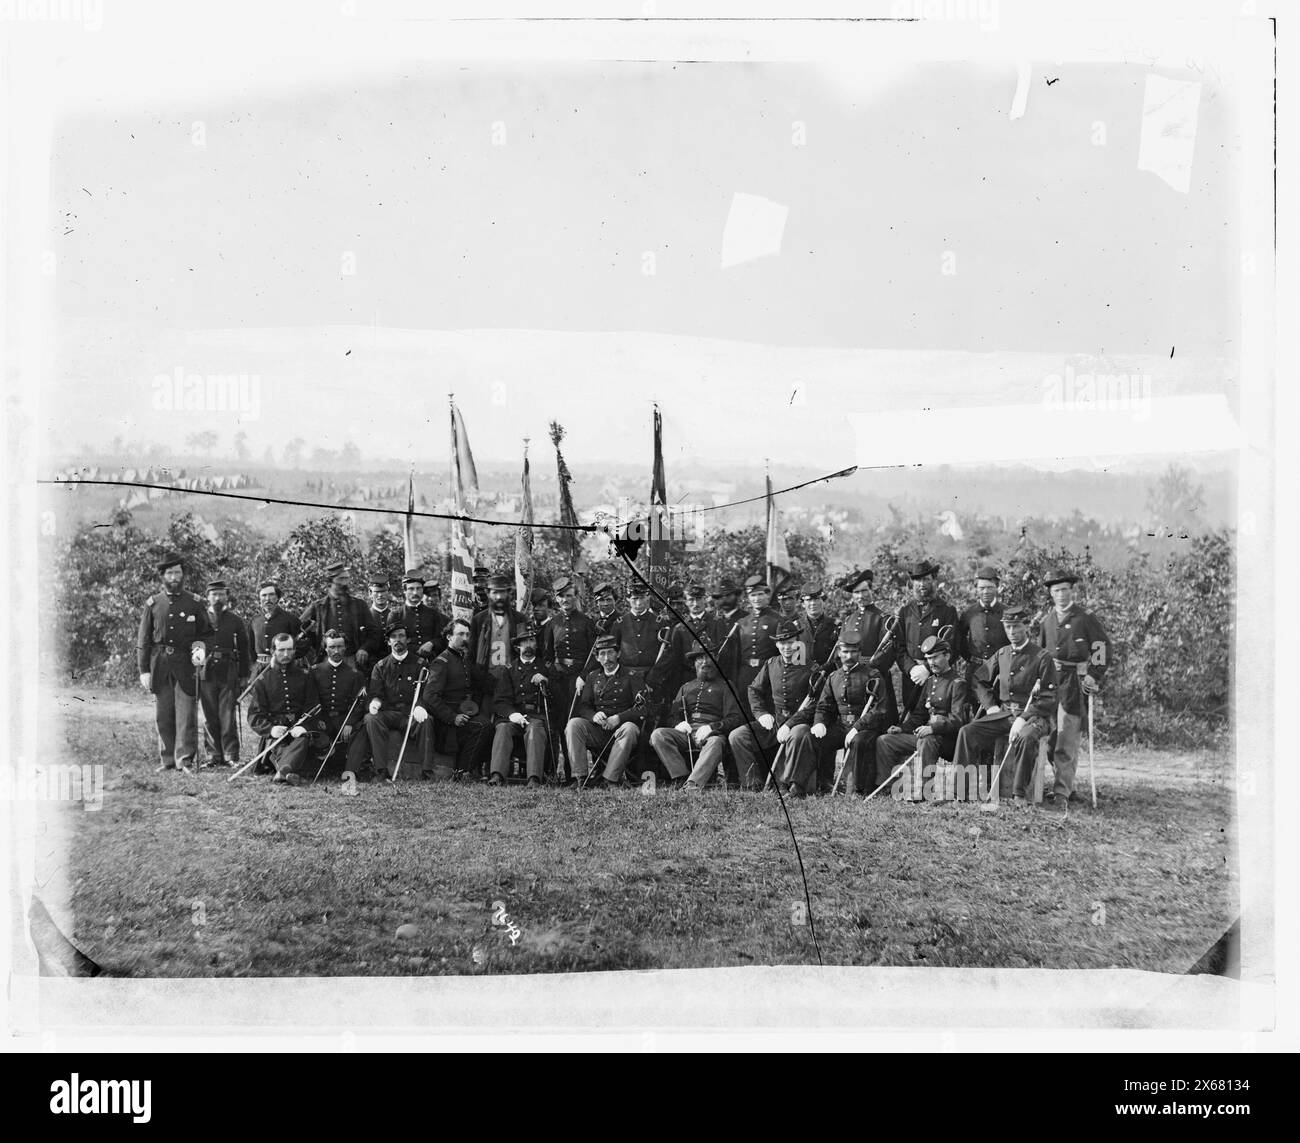 Lt. Col. James J. Smith and officers of 69th New York Infantry (Irish Brigade), Civil War Photographs 1861-1865 Stock Photo